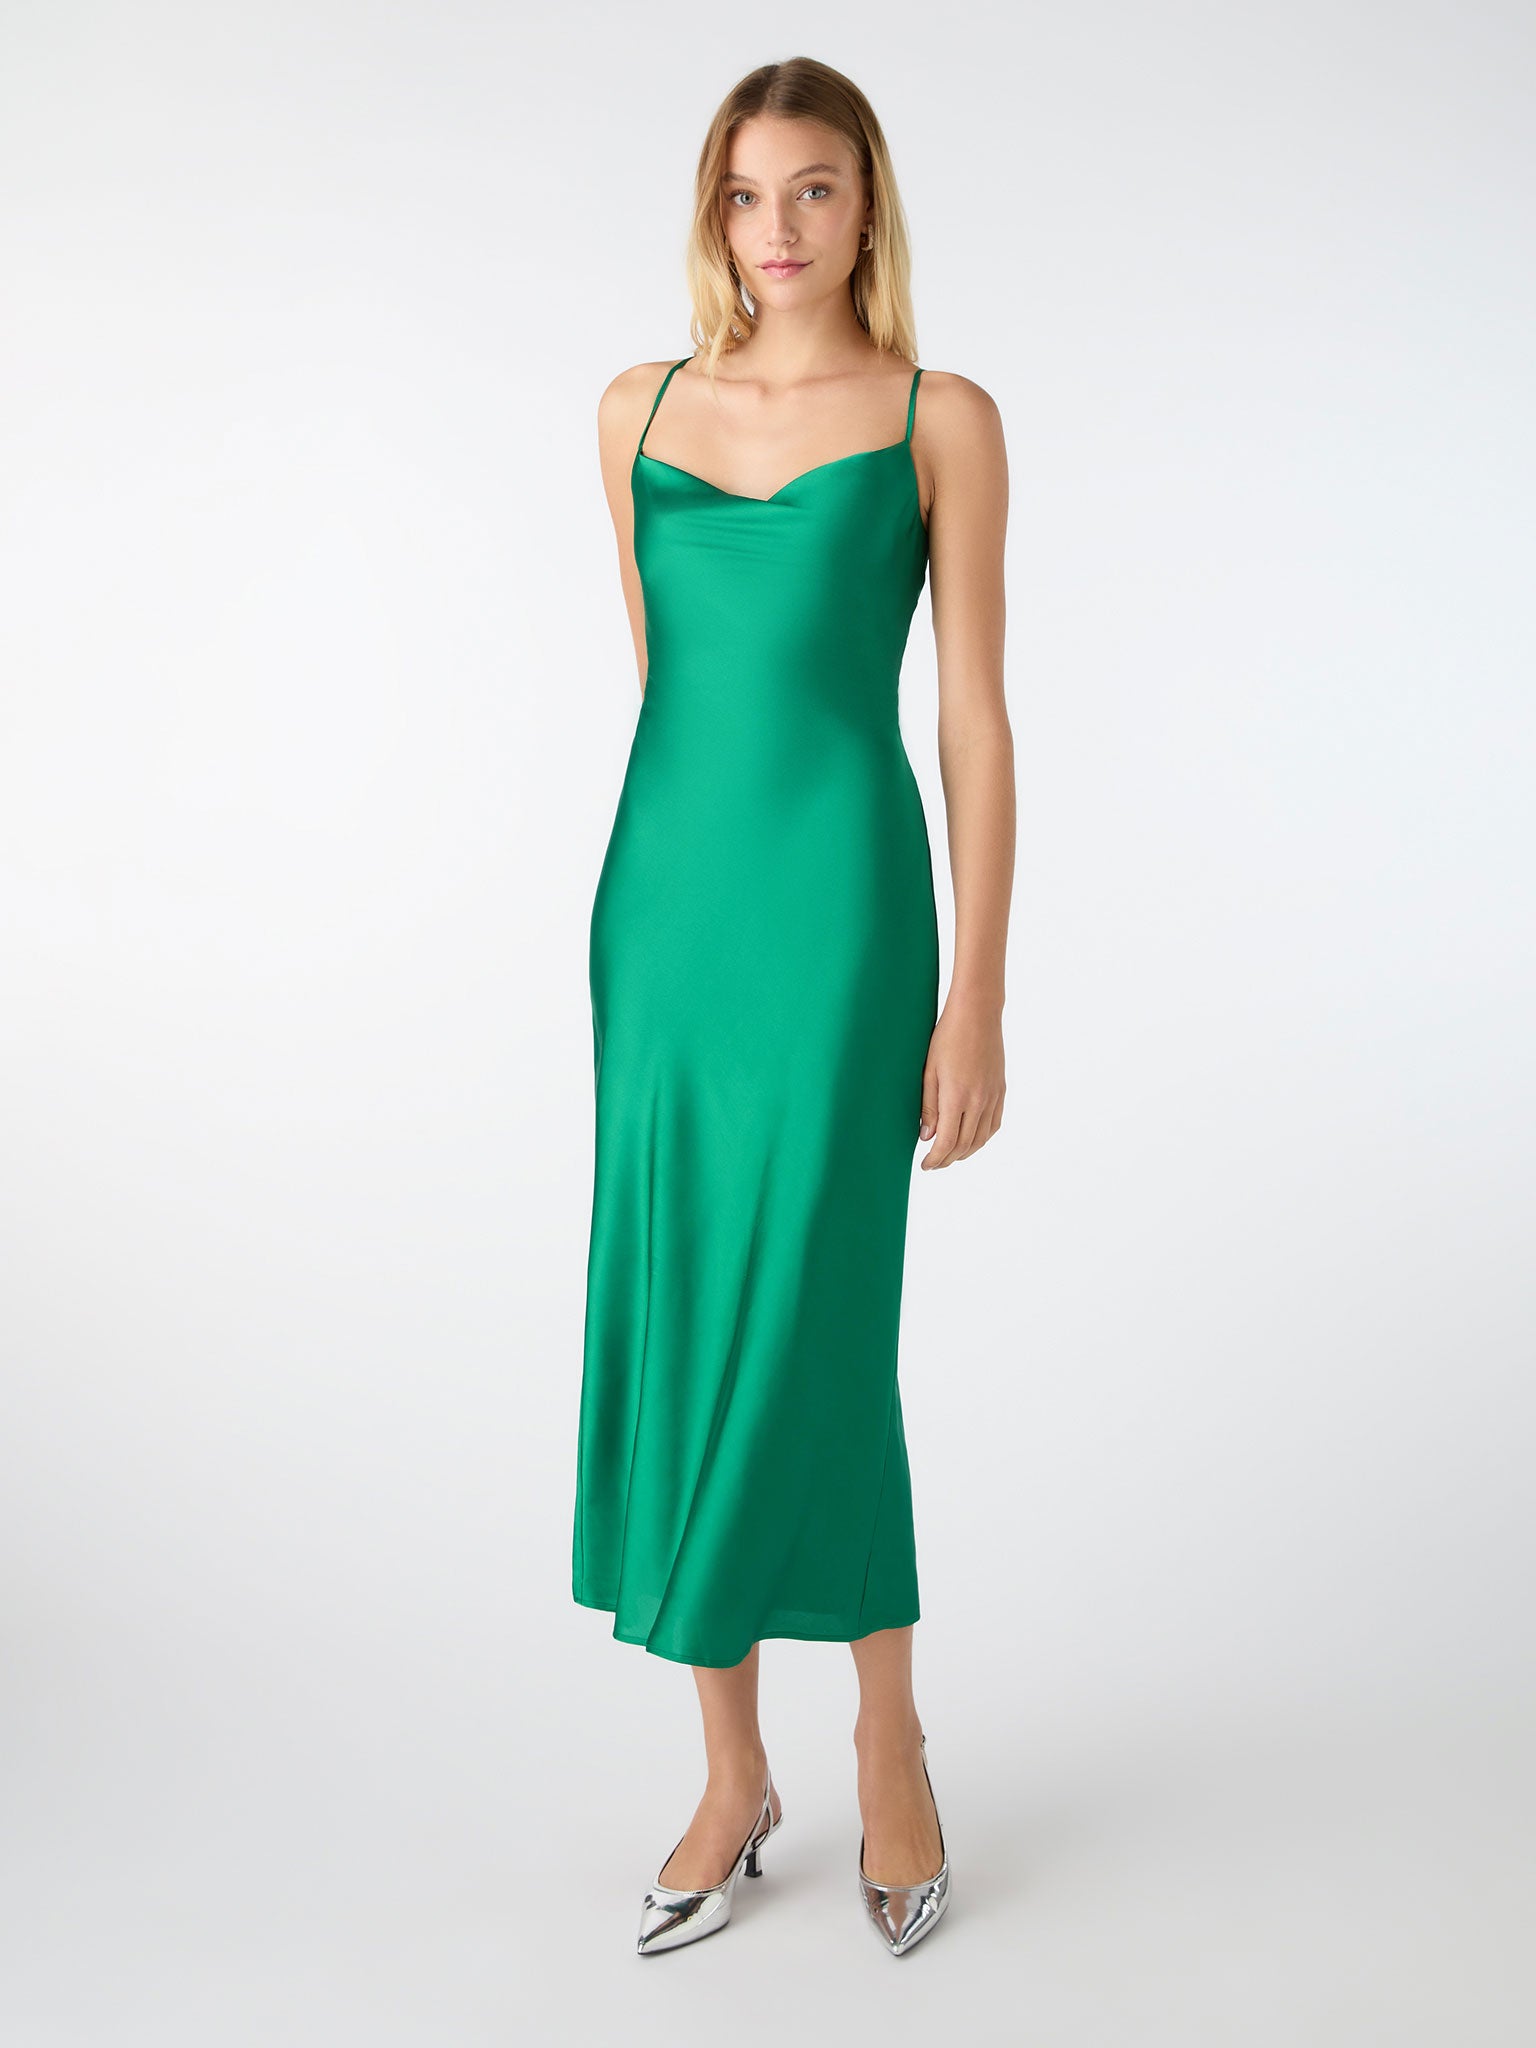 Riviera Midi Dress in Viridian Green | OMNES | Dresses | Sustainable & Affordable Clothing | Shop Women's Fashion